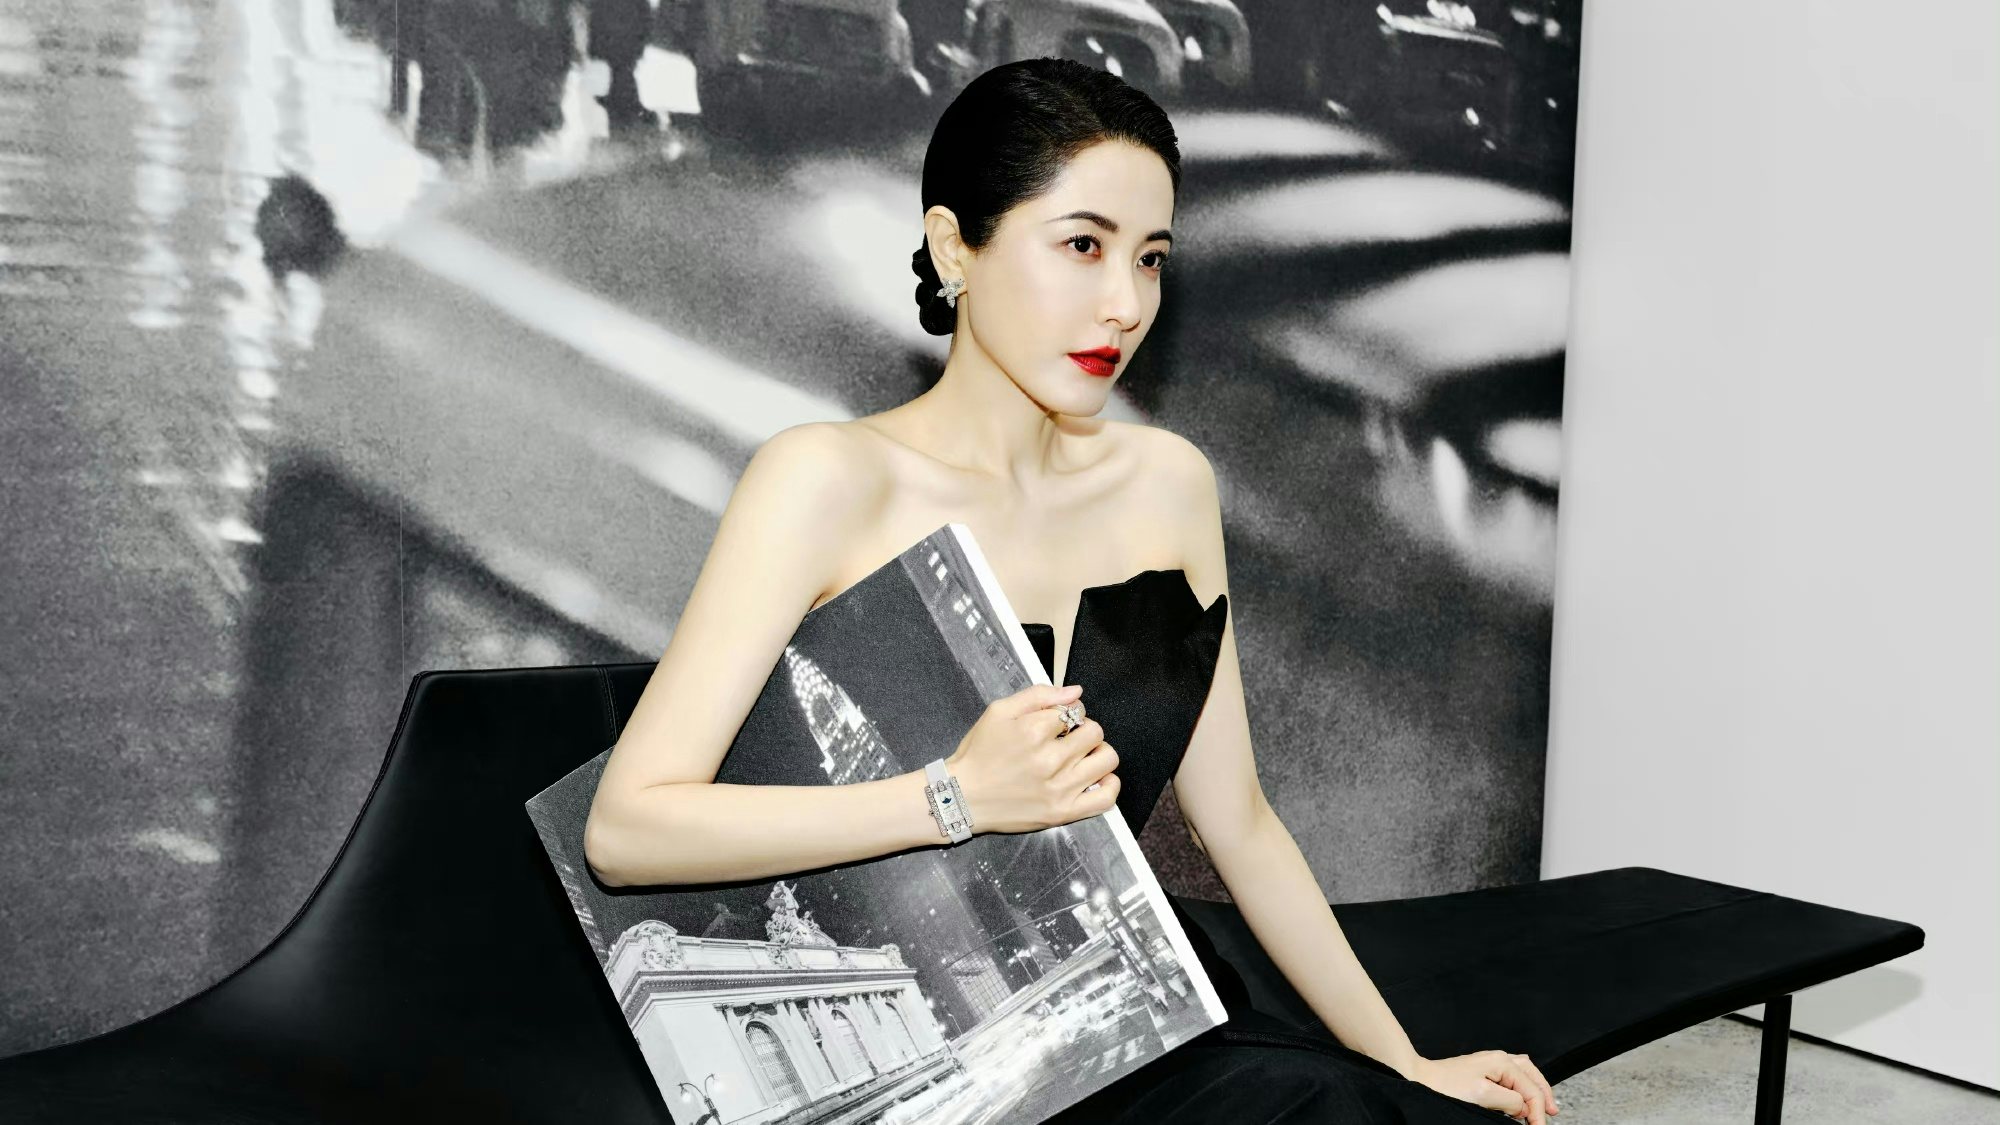 Adapting to a new demographic and localizing are the keys to success for luxury brands seeking to engage younger buyers in China. Photo: Harry Winston